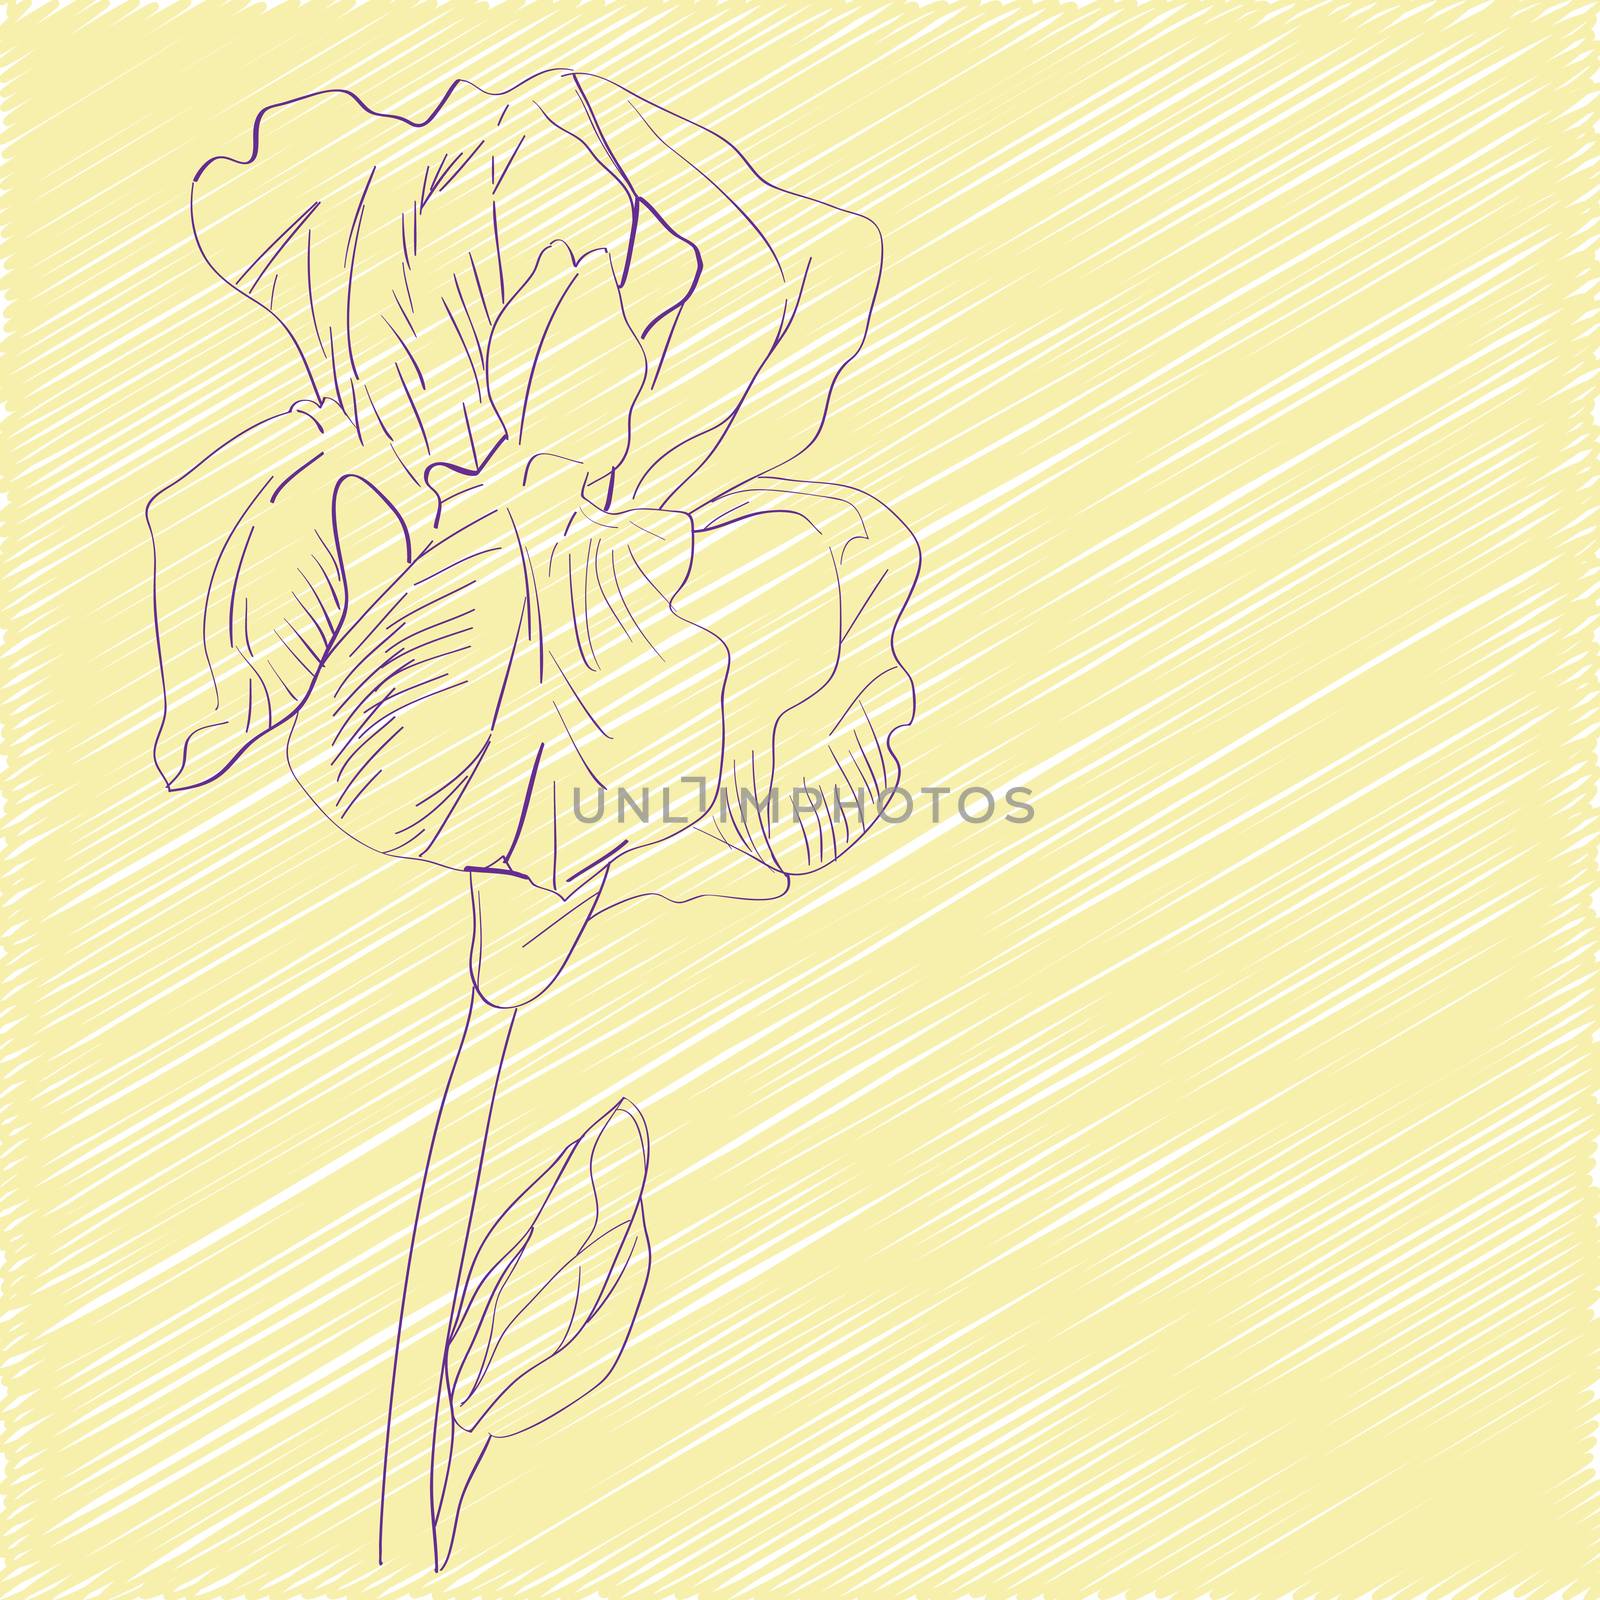 Hand drawn sketch with an iris over a yellow background, greeting card